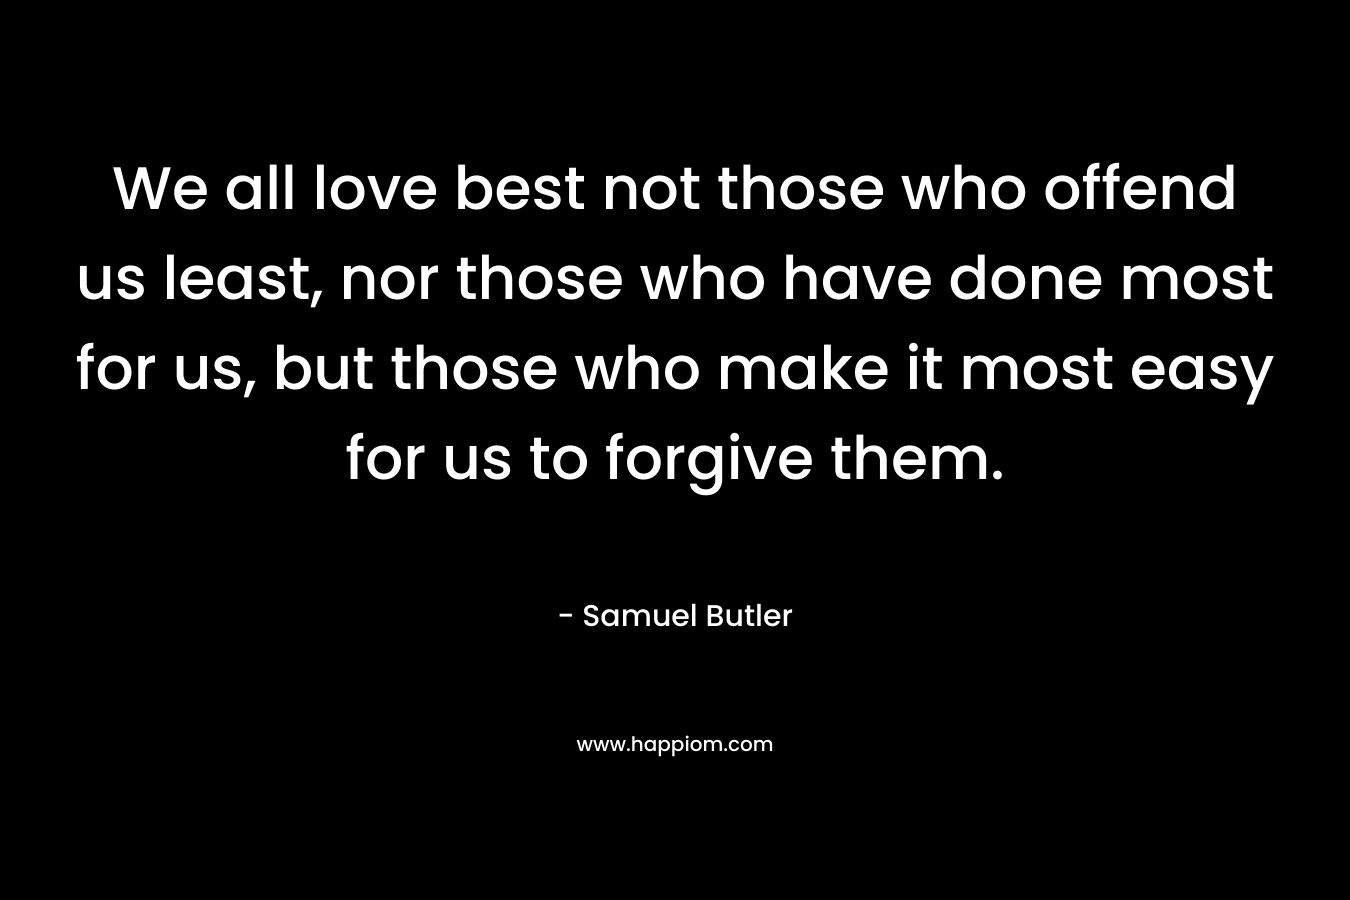 We all love best not those who offend us least, nor those who have done most for us, but those who make it most easy for us to forgive them. – Samuel Butler